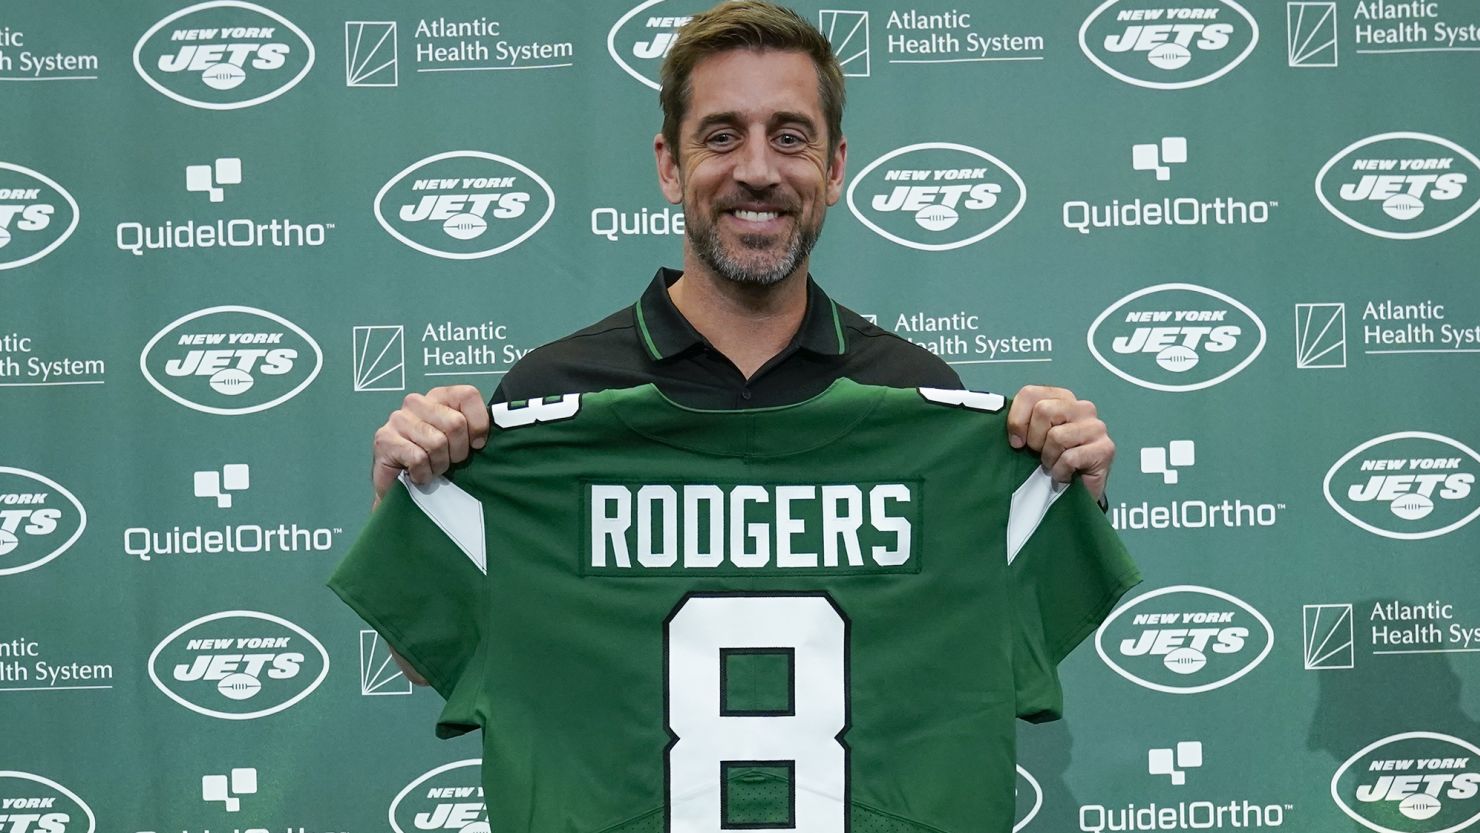 Aaron Rodgers was introduced as the New York Jets' new quarterback.